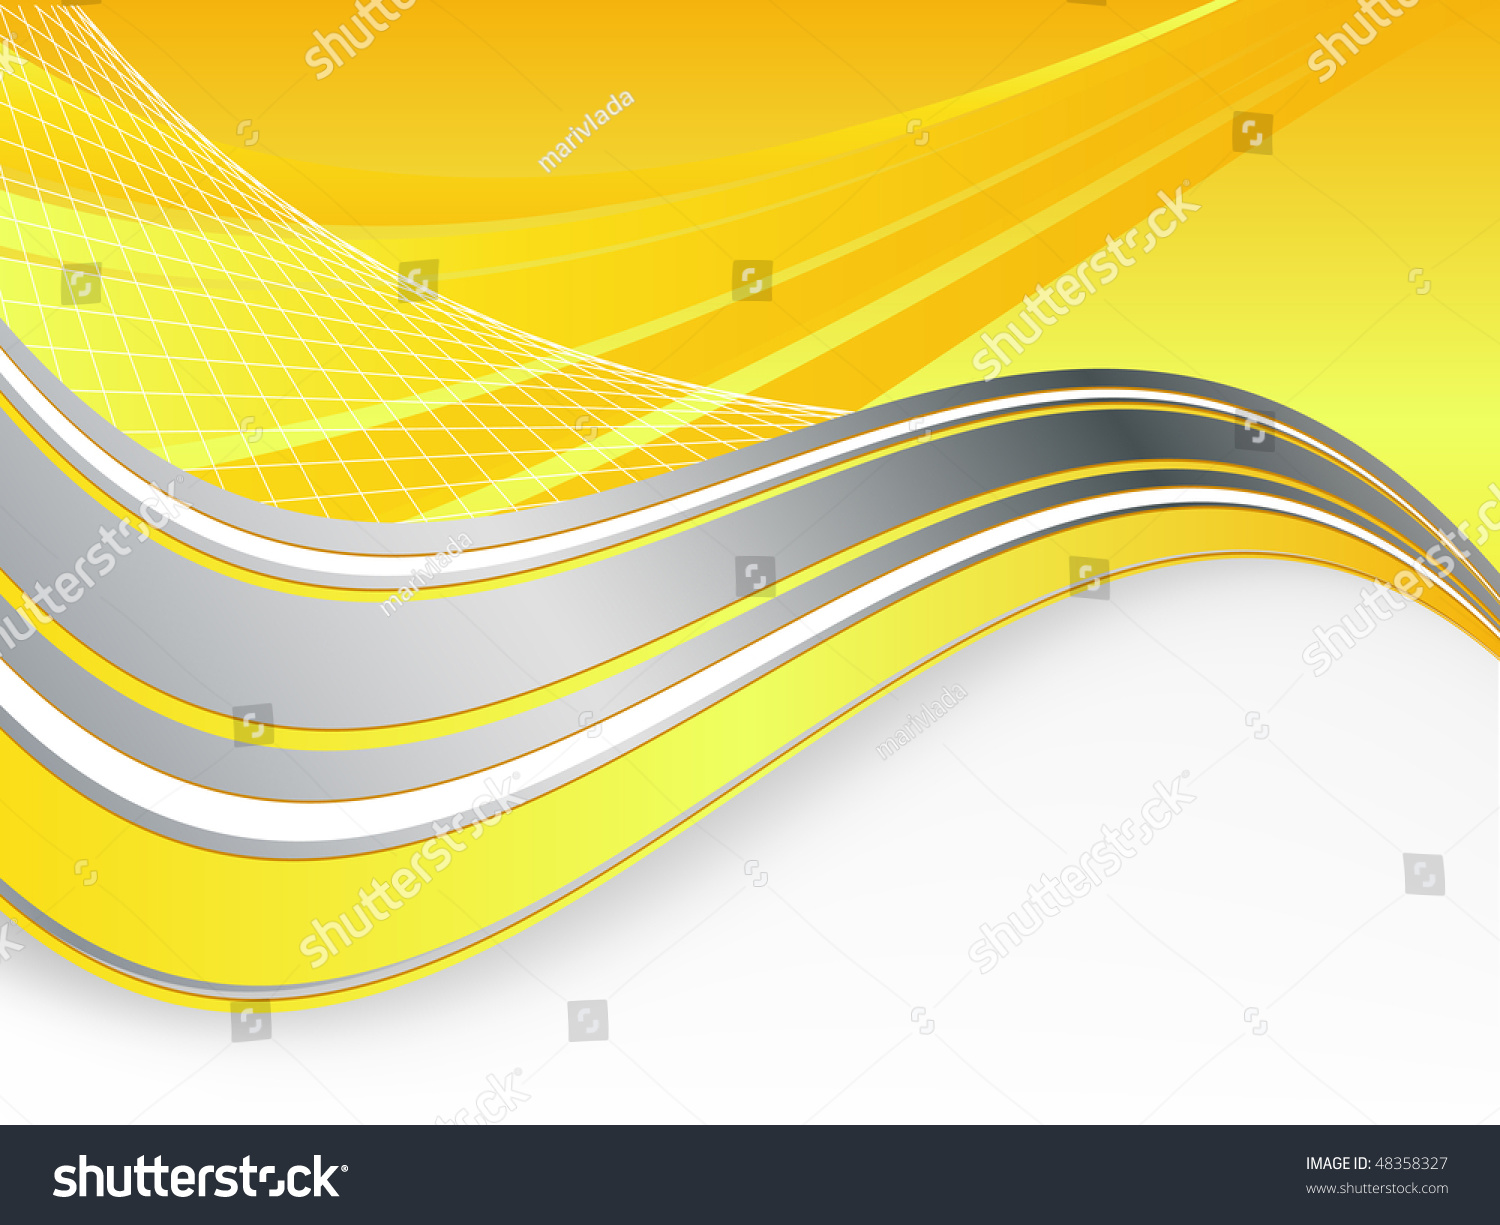 Abstract Vector Wavy Lines With Copy Space For Your Text - 48358327